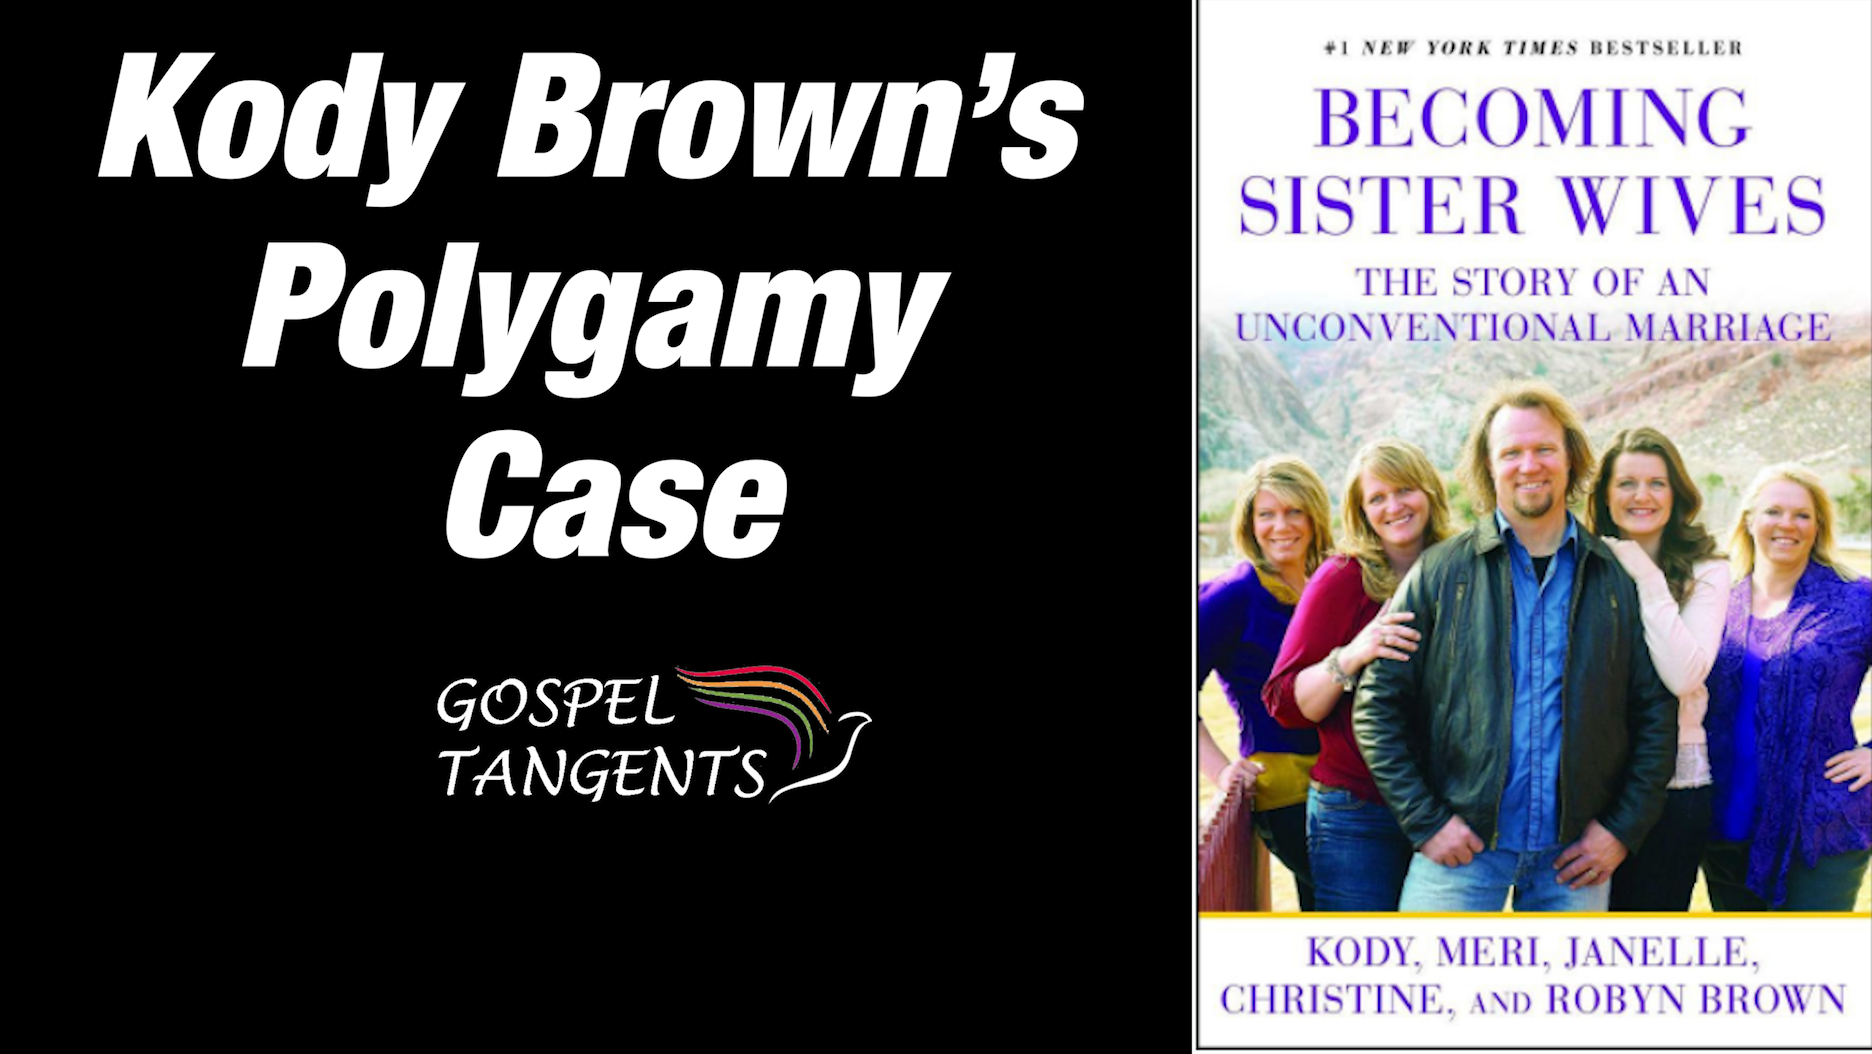 Kody Brown's polygamy case won at first, but lost on appeal.